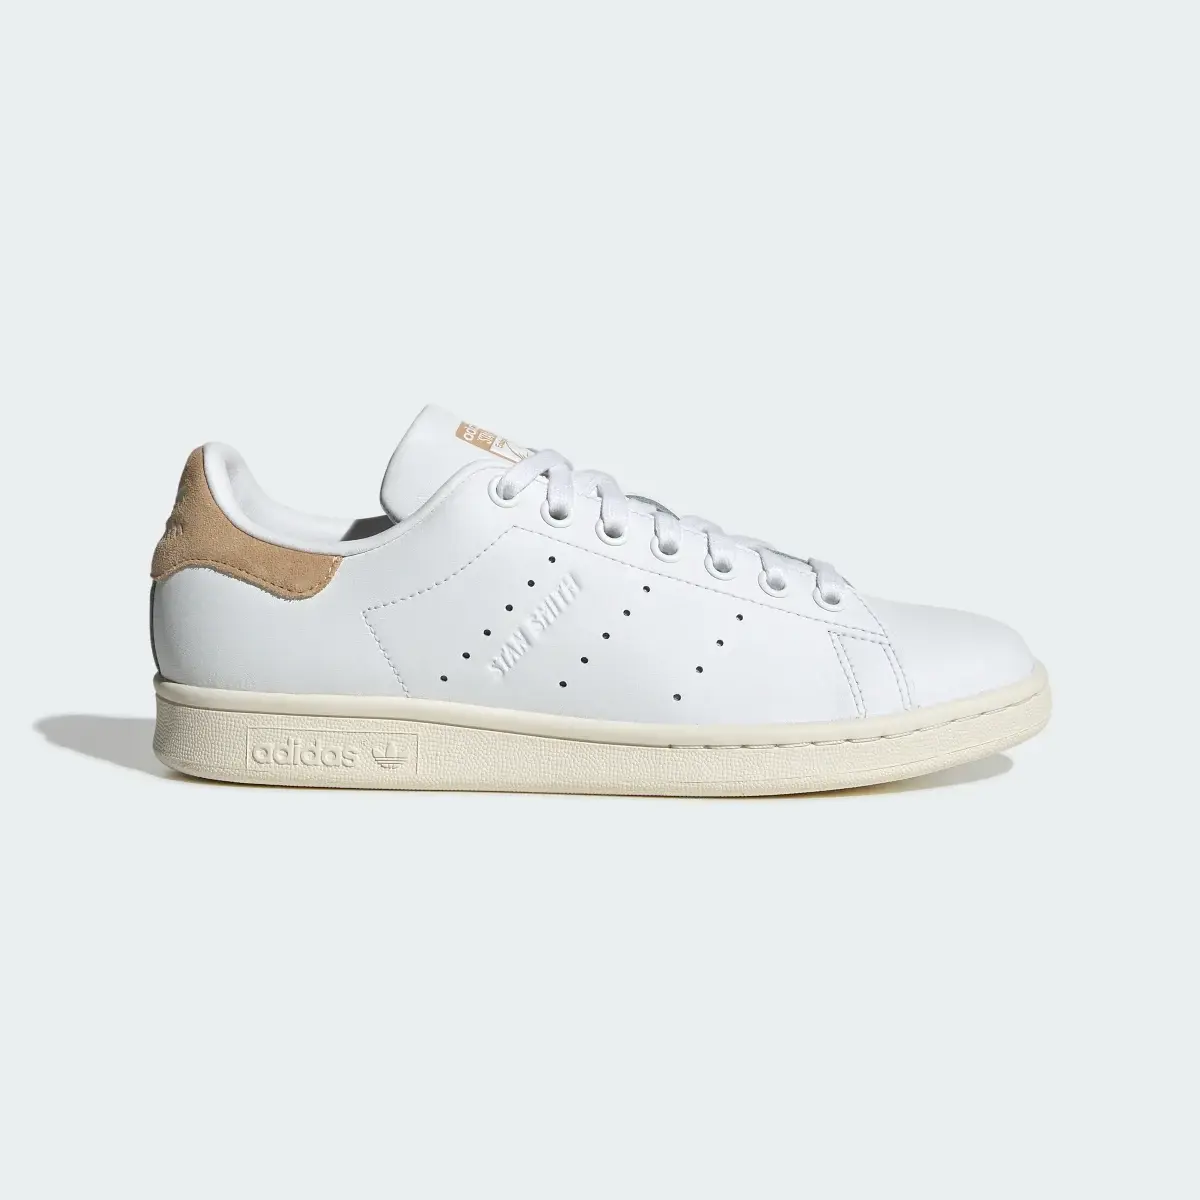 Adidas Stan Smith Shoes. 2